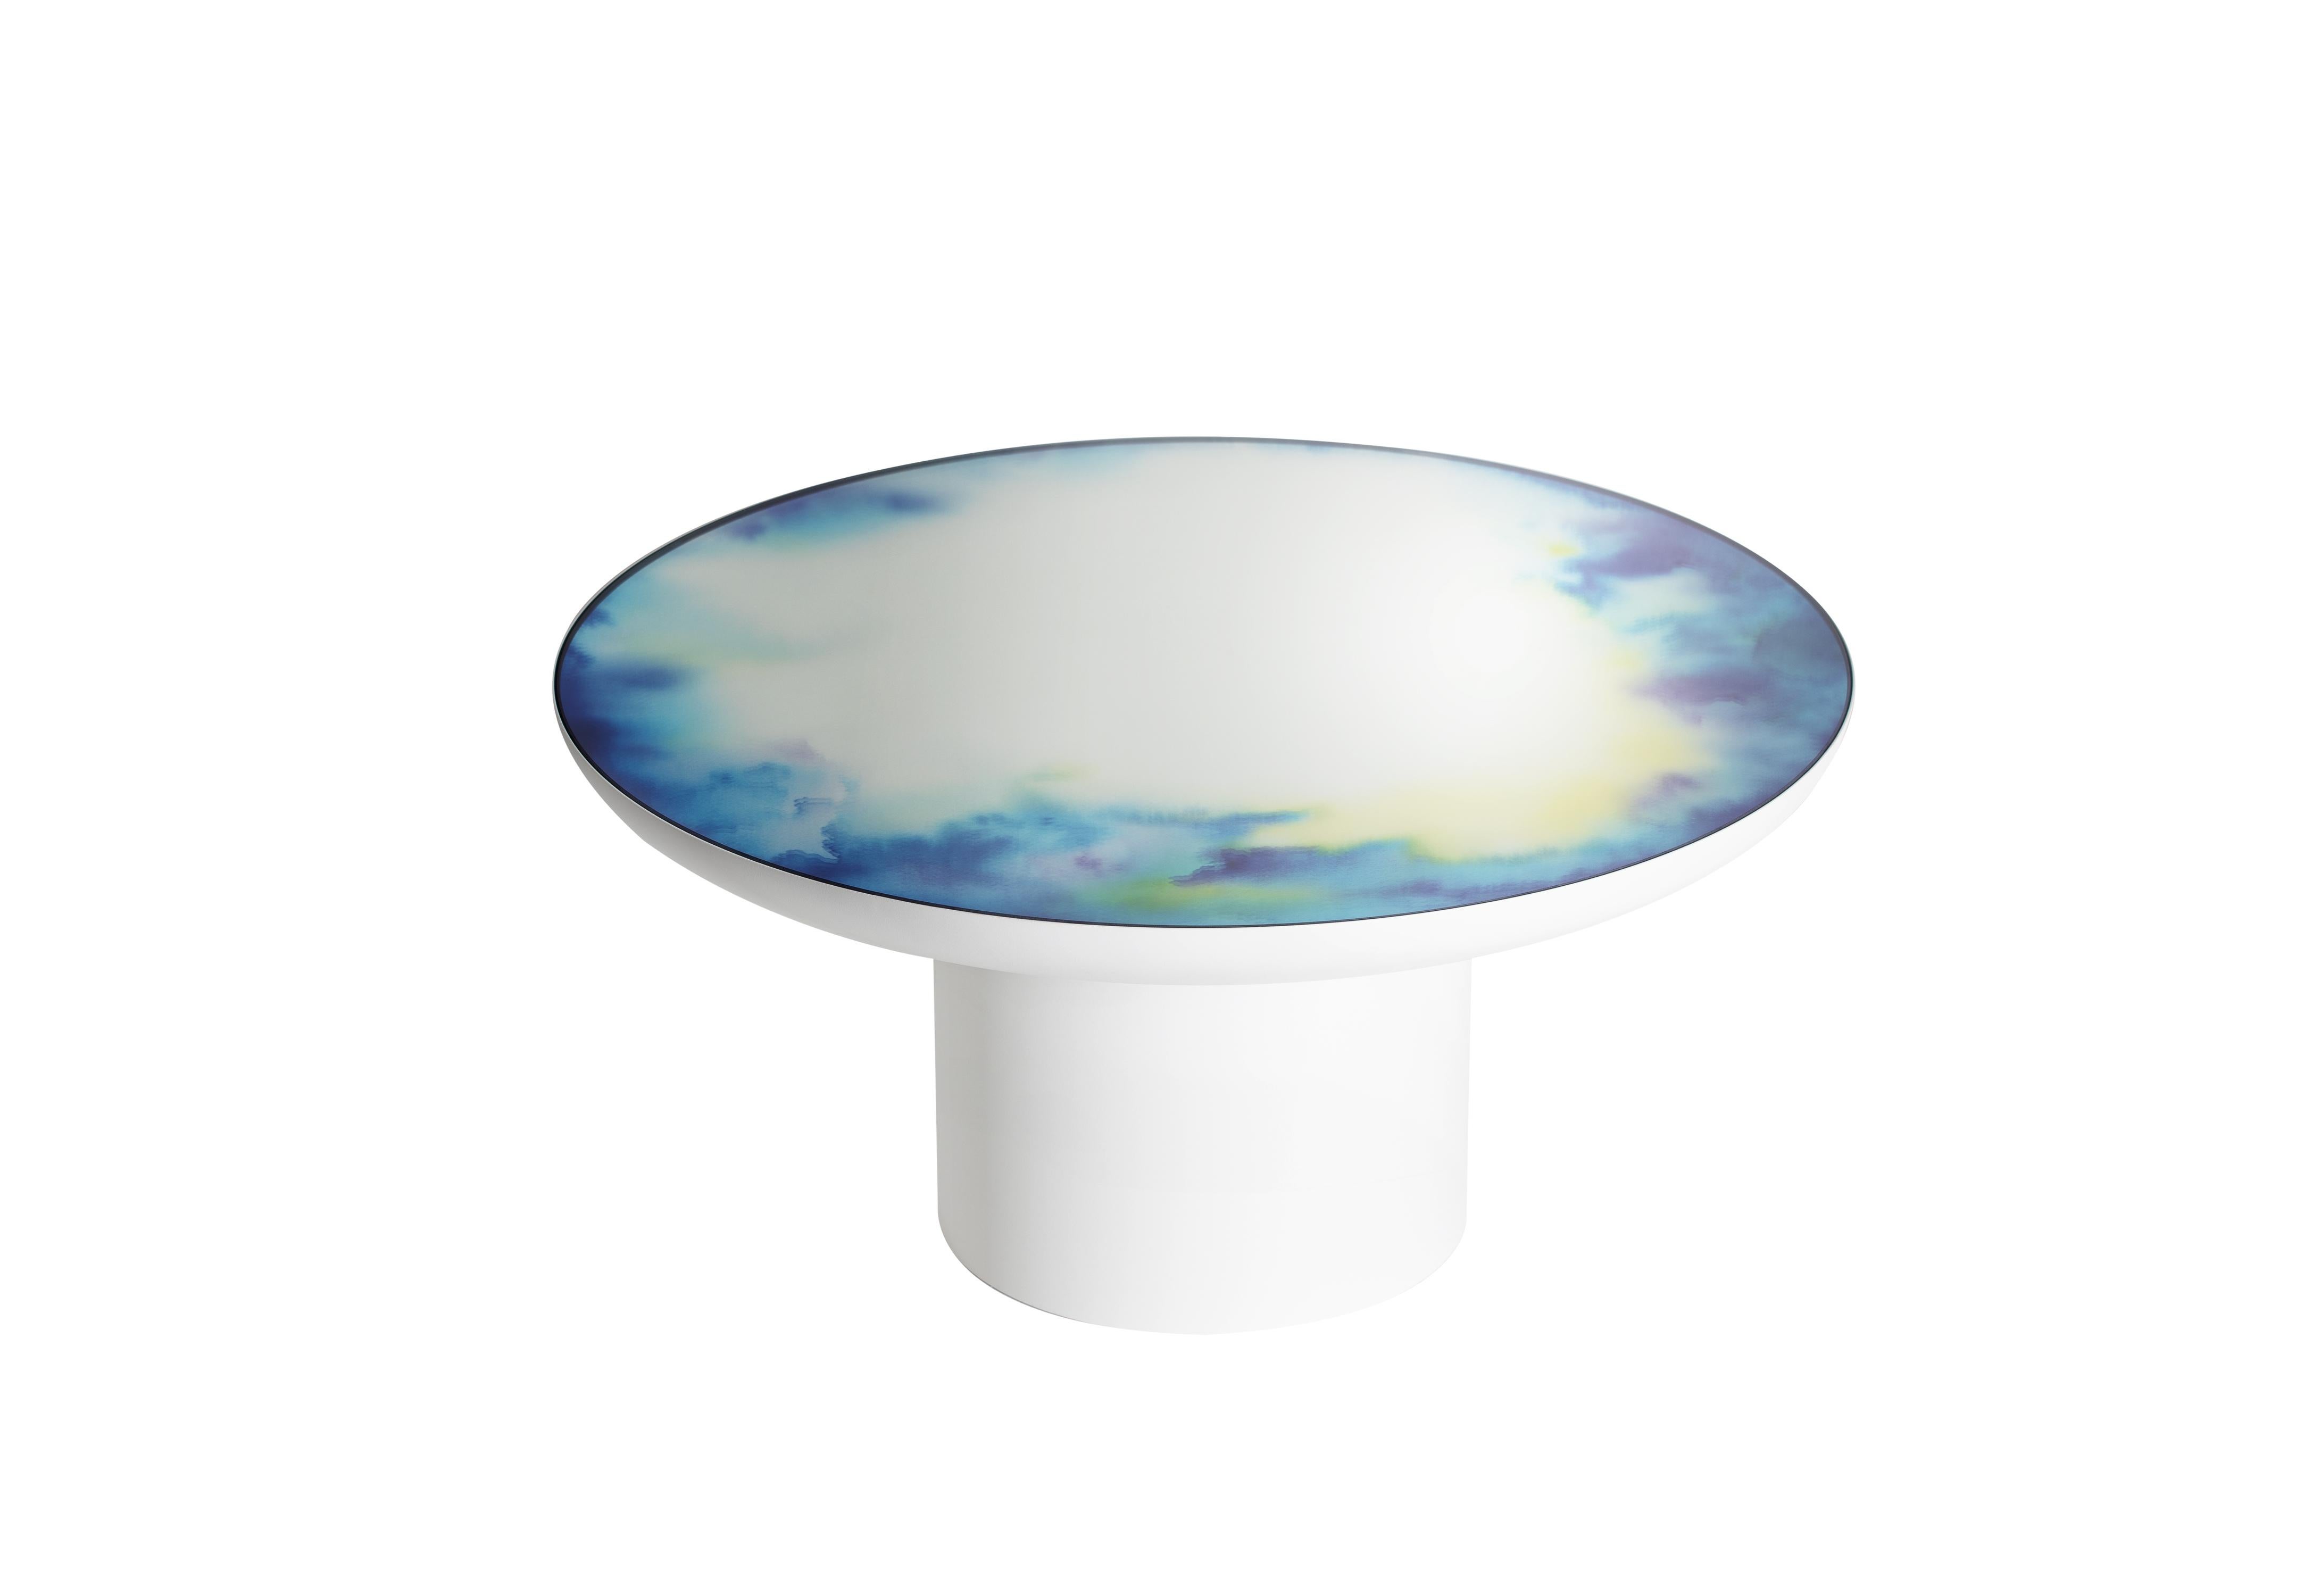 Petite Friture Large Francis Coffee Table in White & Green Watercolour Mirror by Constance Guisset, 2018

Francis collection starts with a painter brush resting in a glass of water, when watercolour pigments reveal shifting drawings. Constance